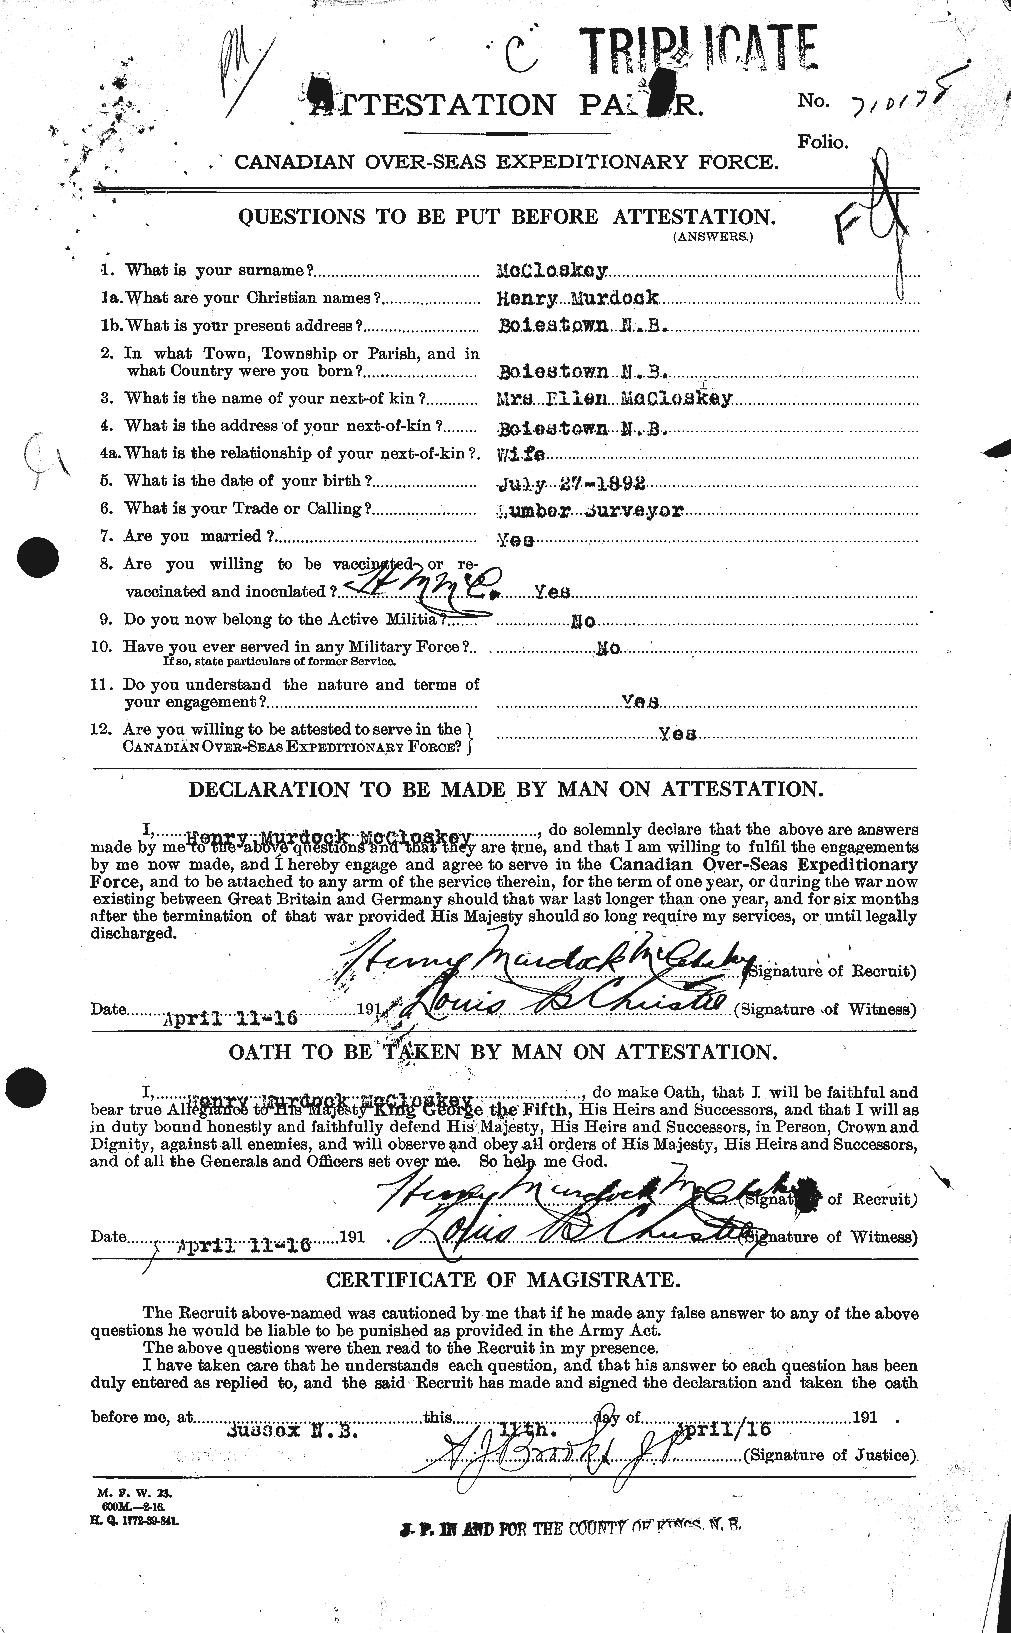 Personnel Records of the First World War - CEF 134631a